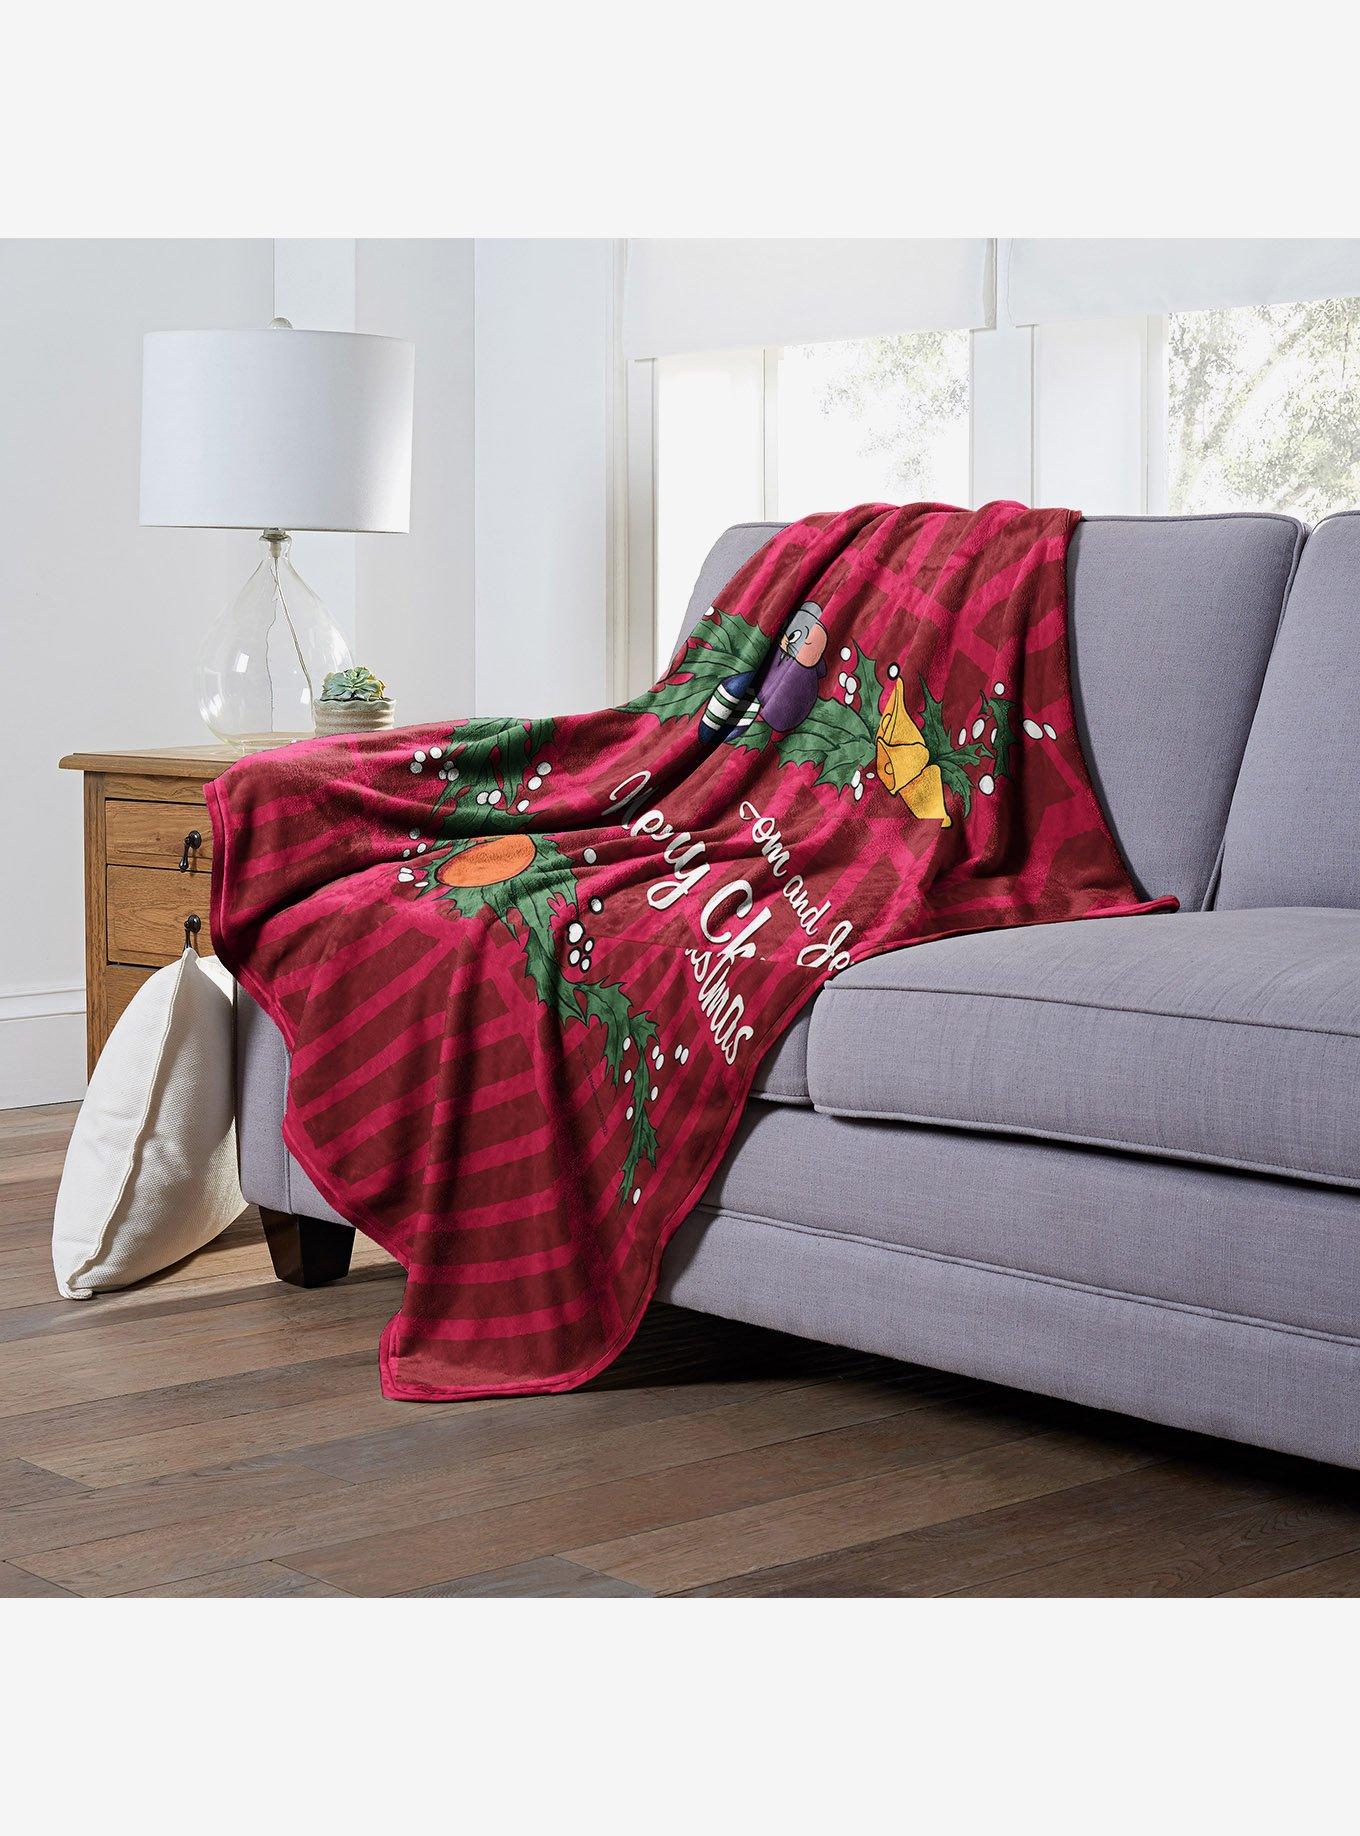 Tom And Jerry Merry Christmas Silk Touch Throw, , alternate